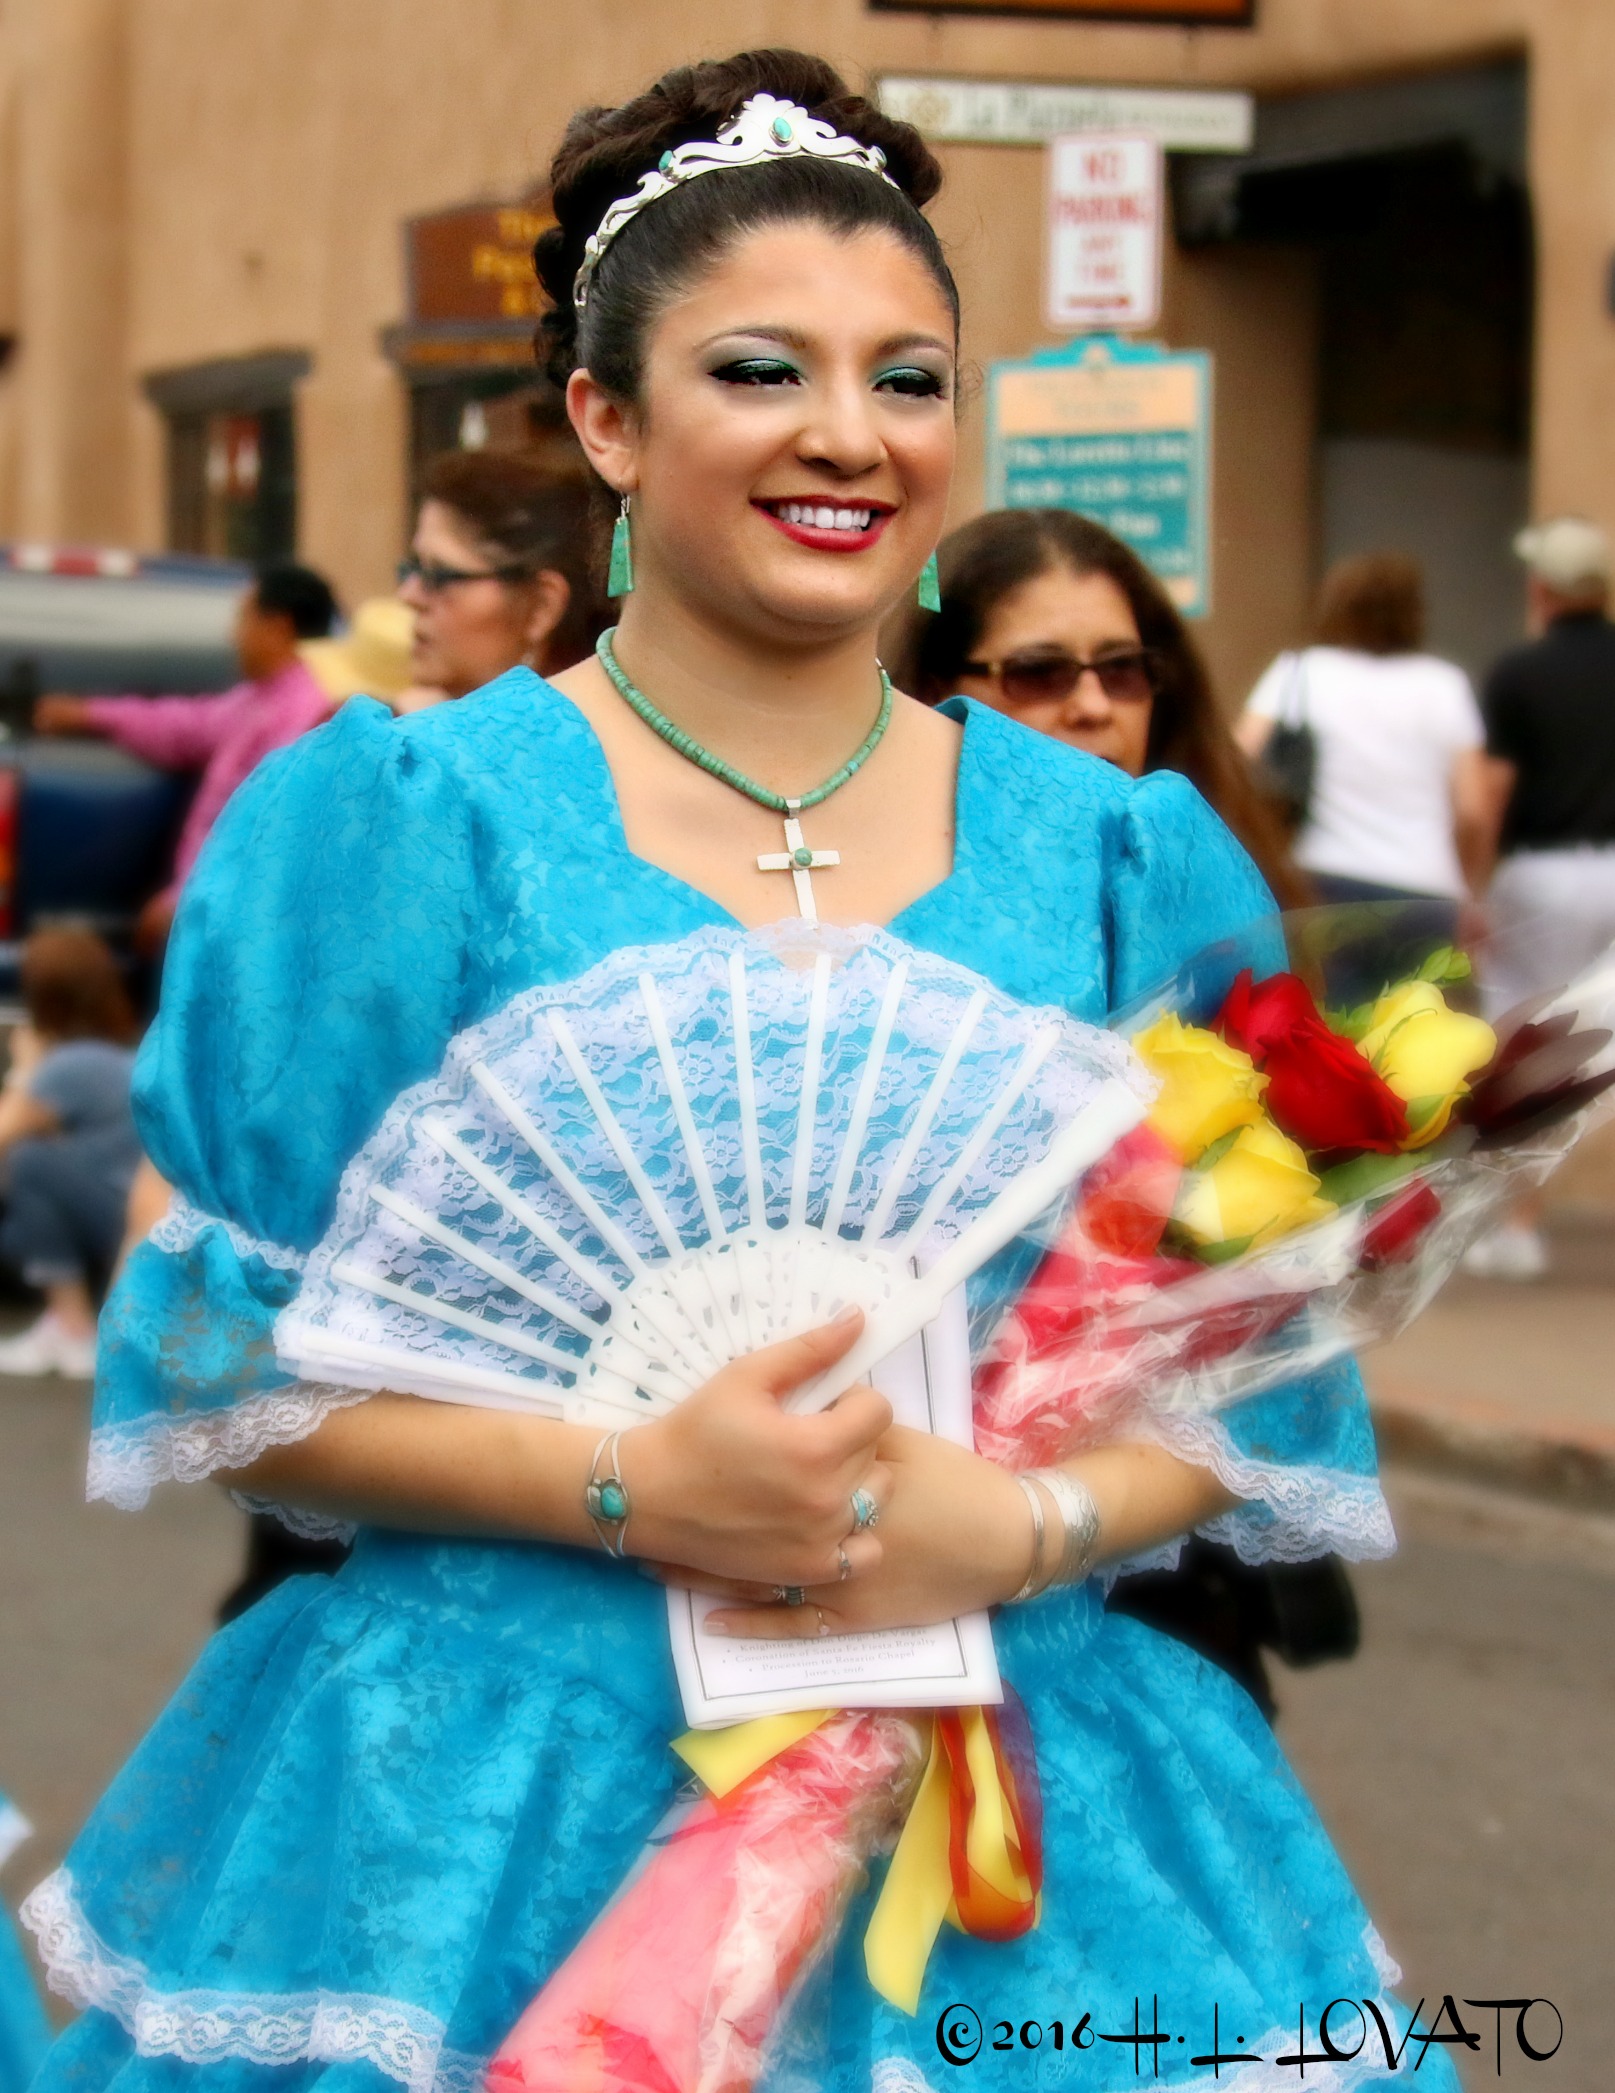 Woman dressed in a bright blue gown holding a lace fan